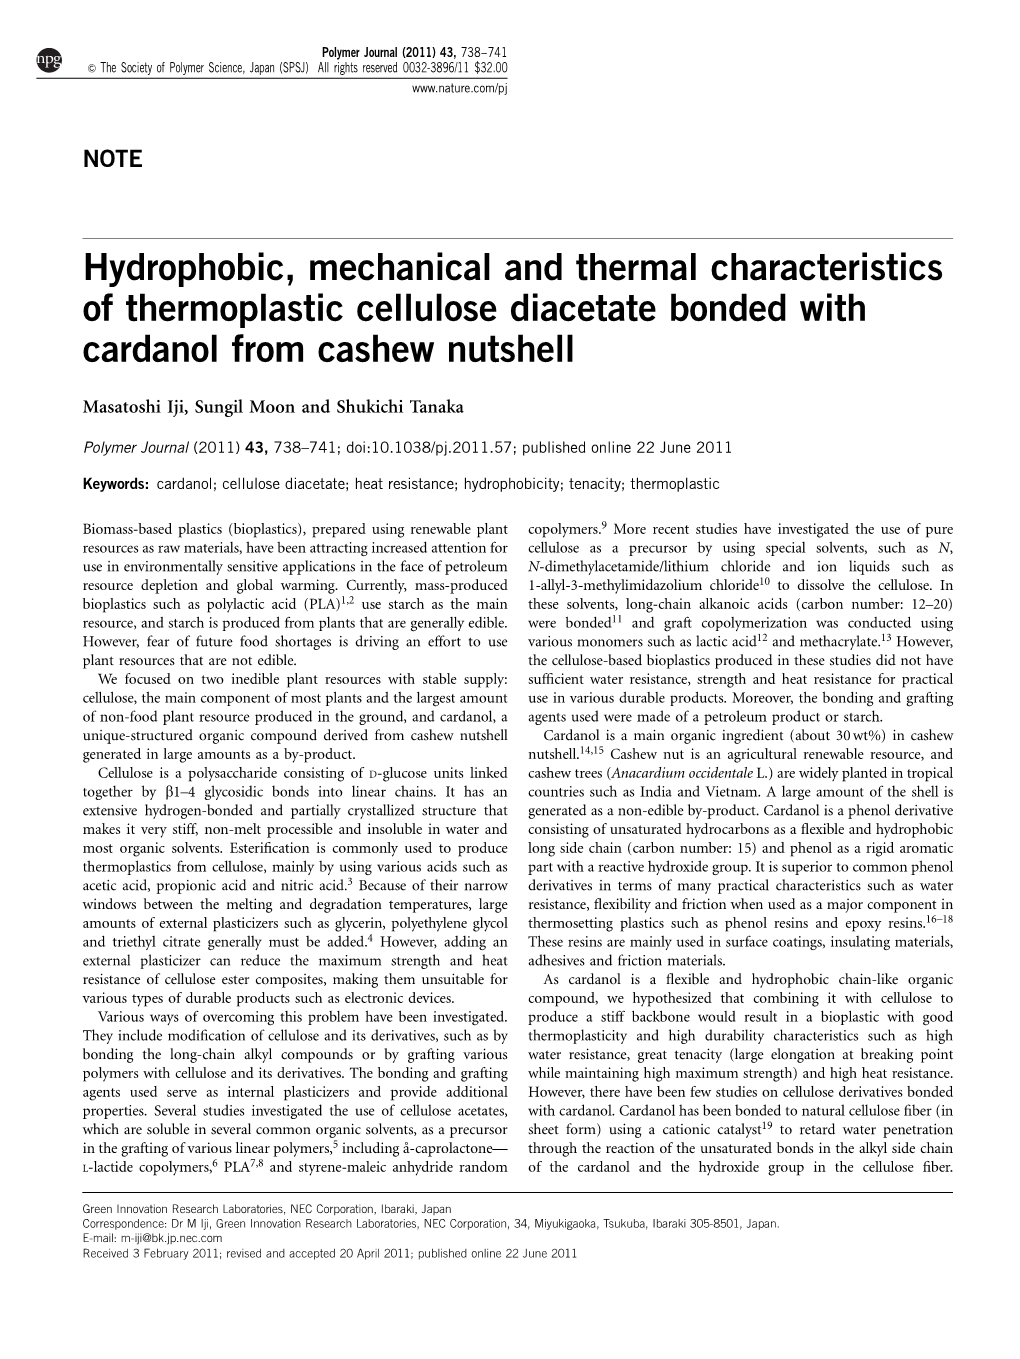 Hydrophobic, Mechanical and Thermal Characteristics of Thermoplastic Cellulose Diacetate Bonded with Cardanol from Cashew Nutshell